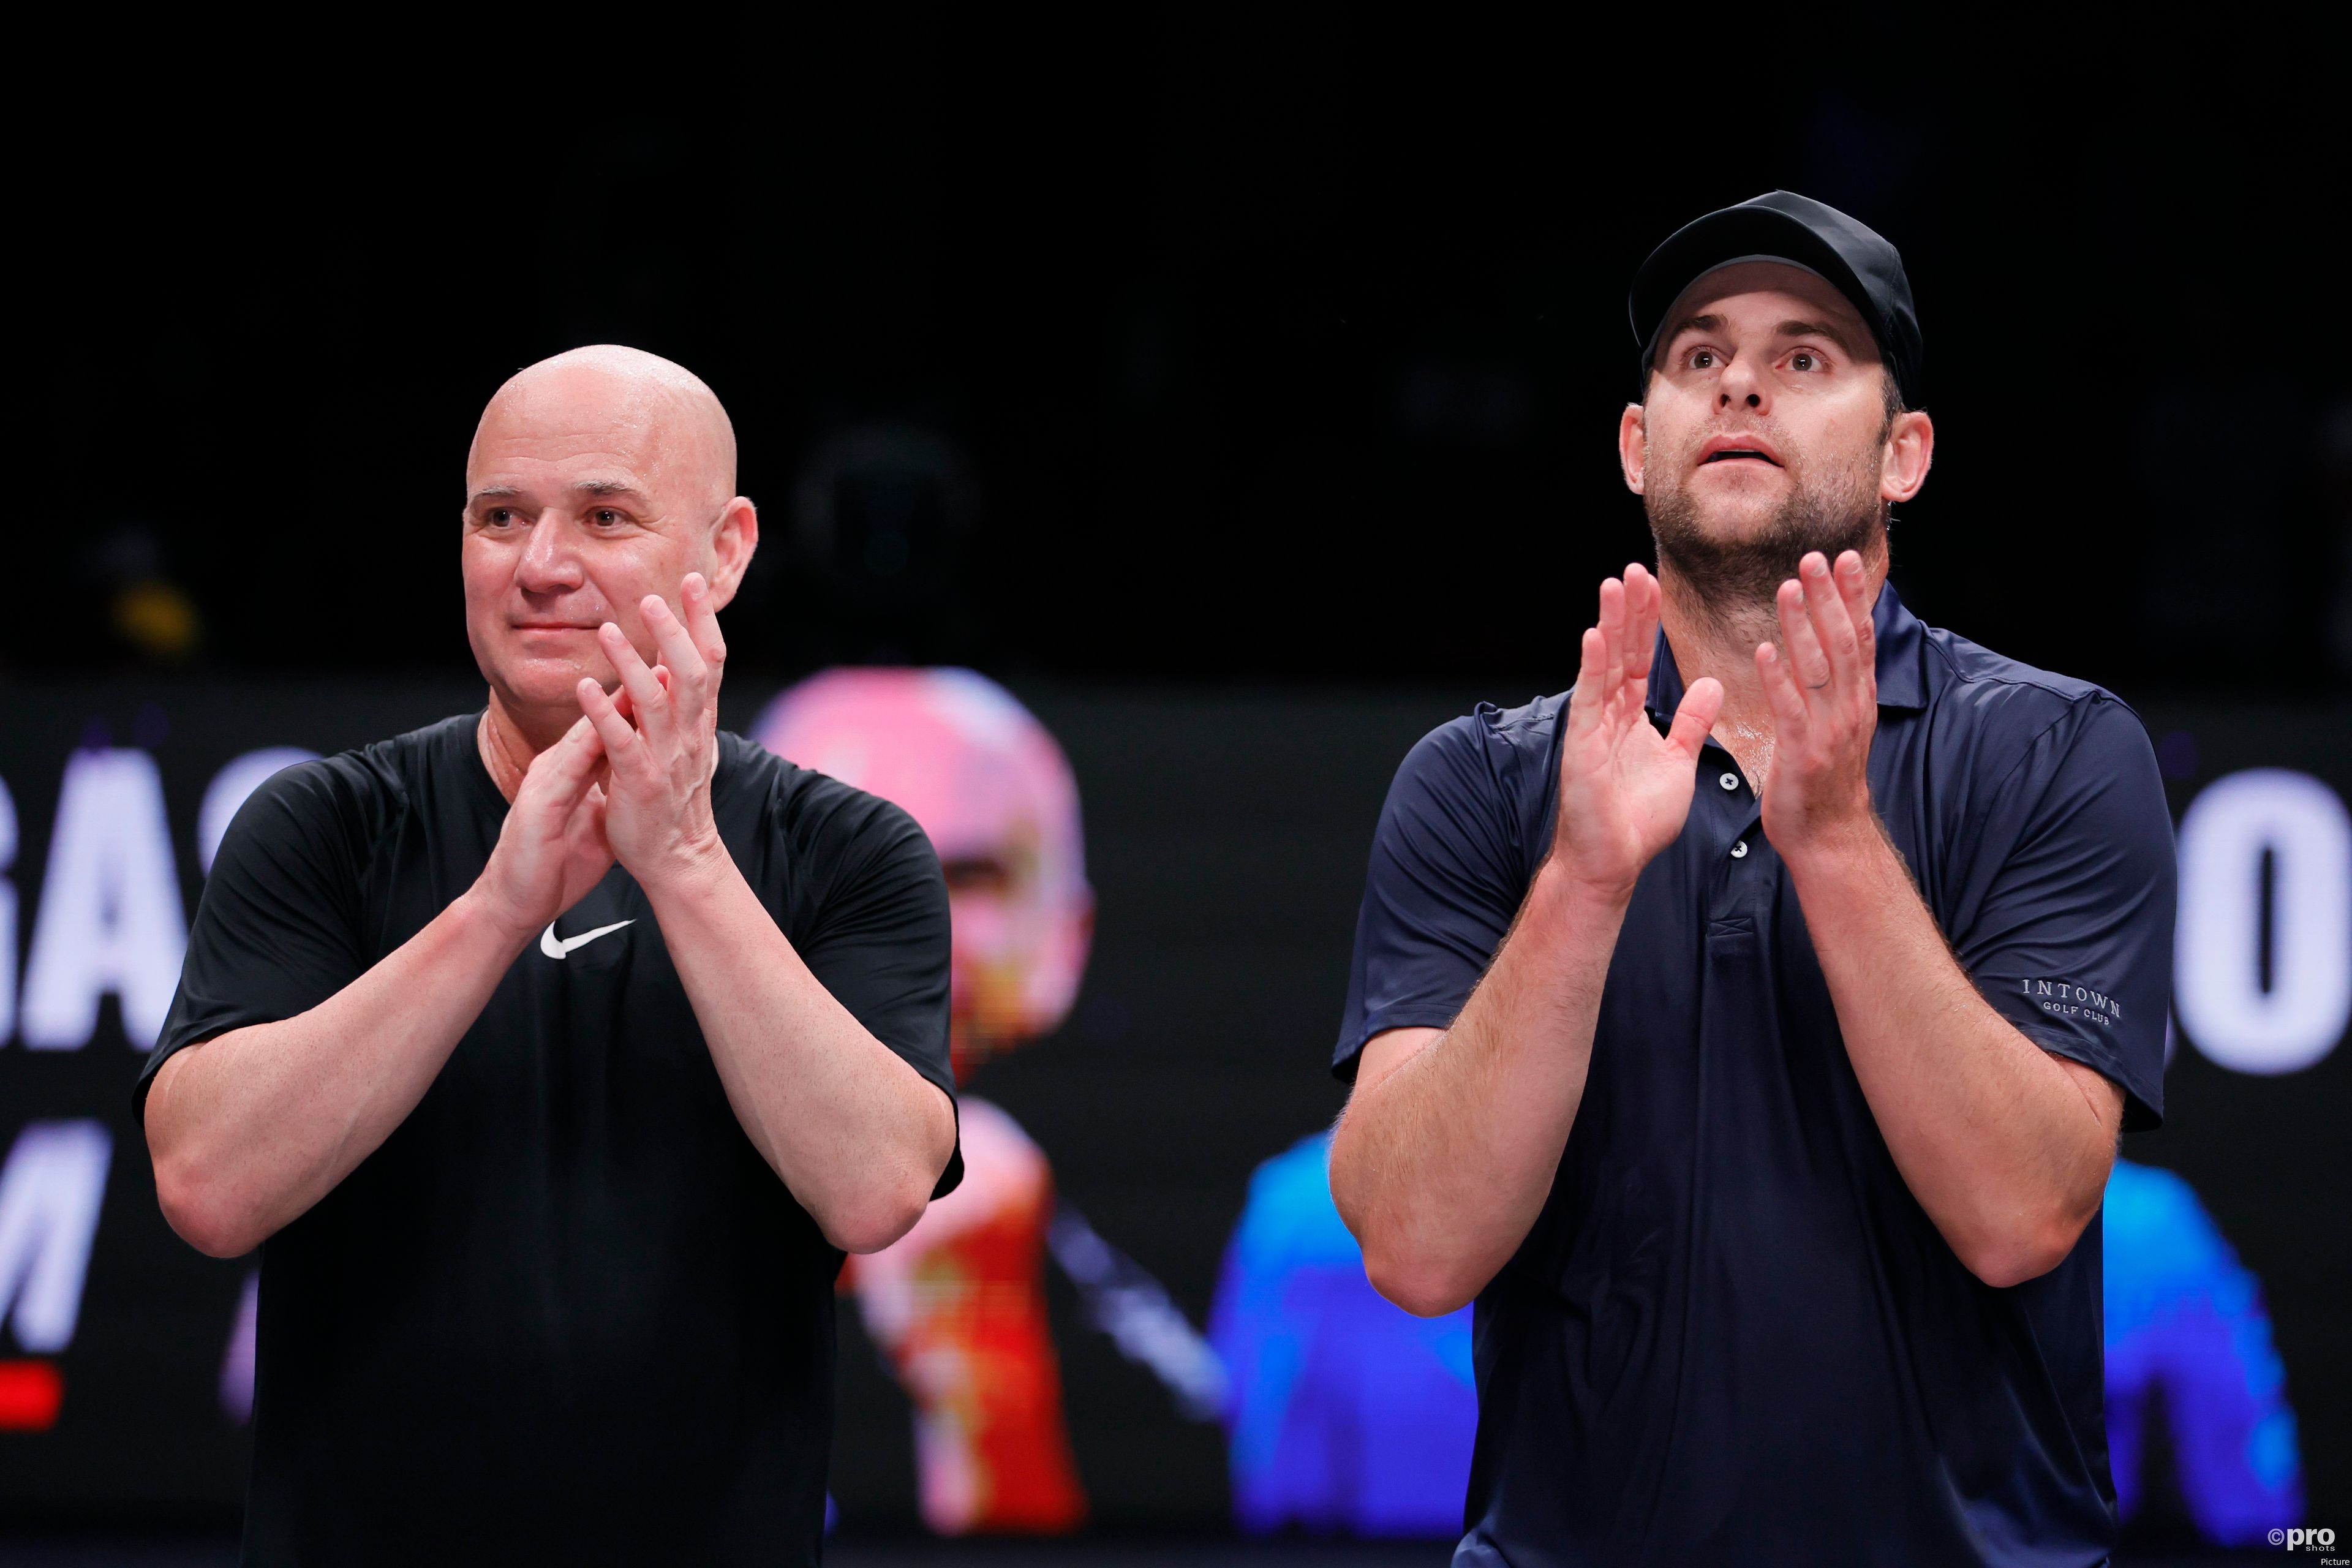 Andy Roddick and Andre Agassi at a pickleball event